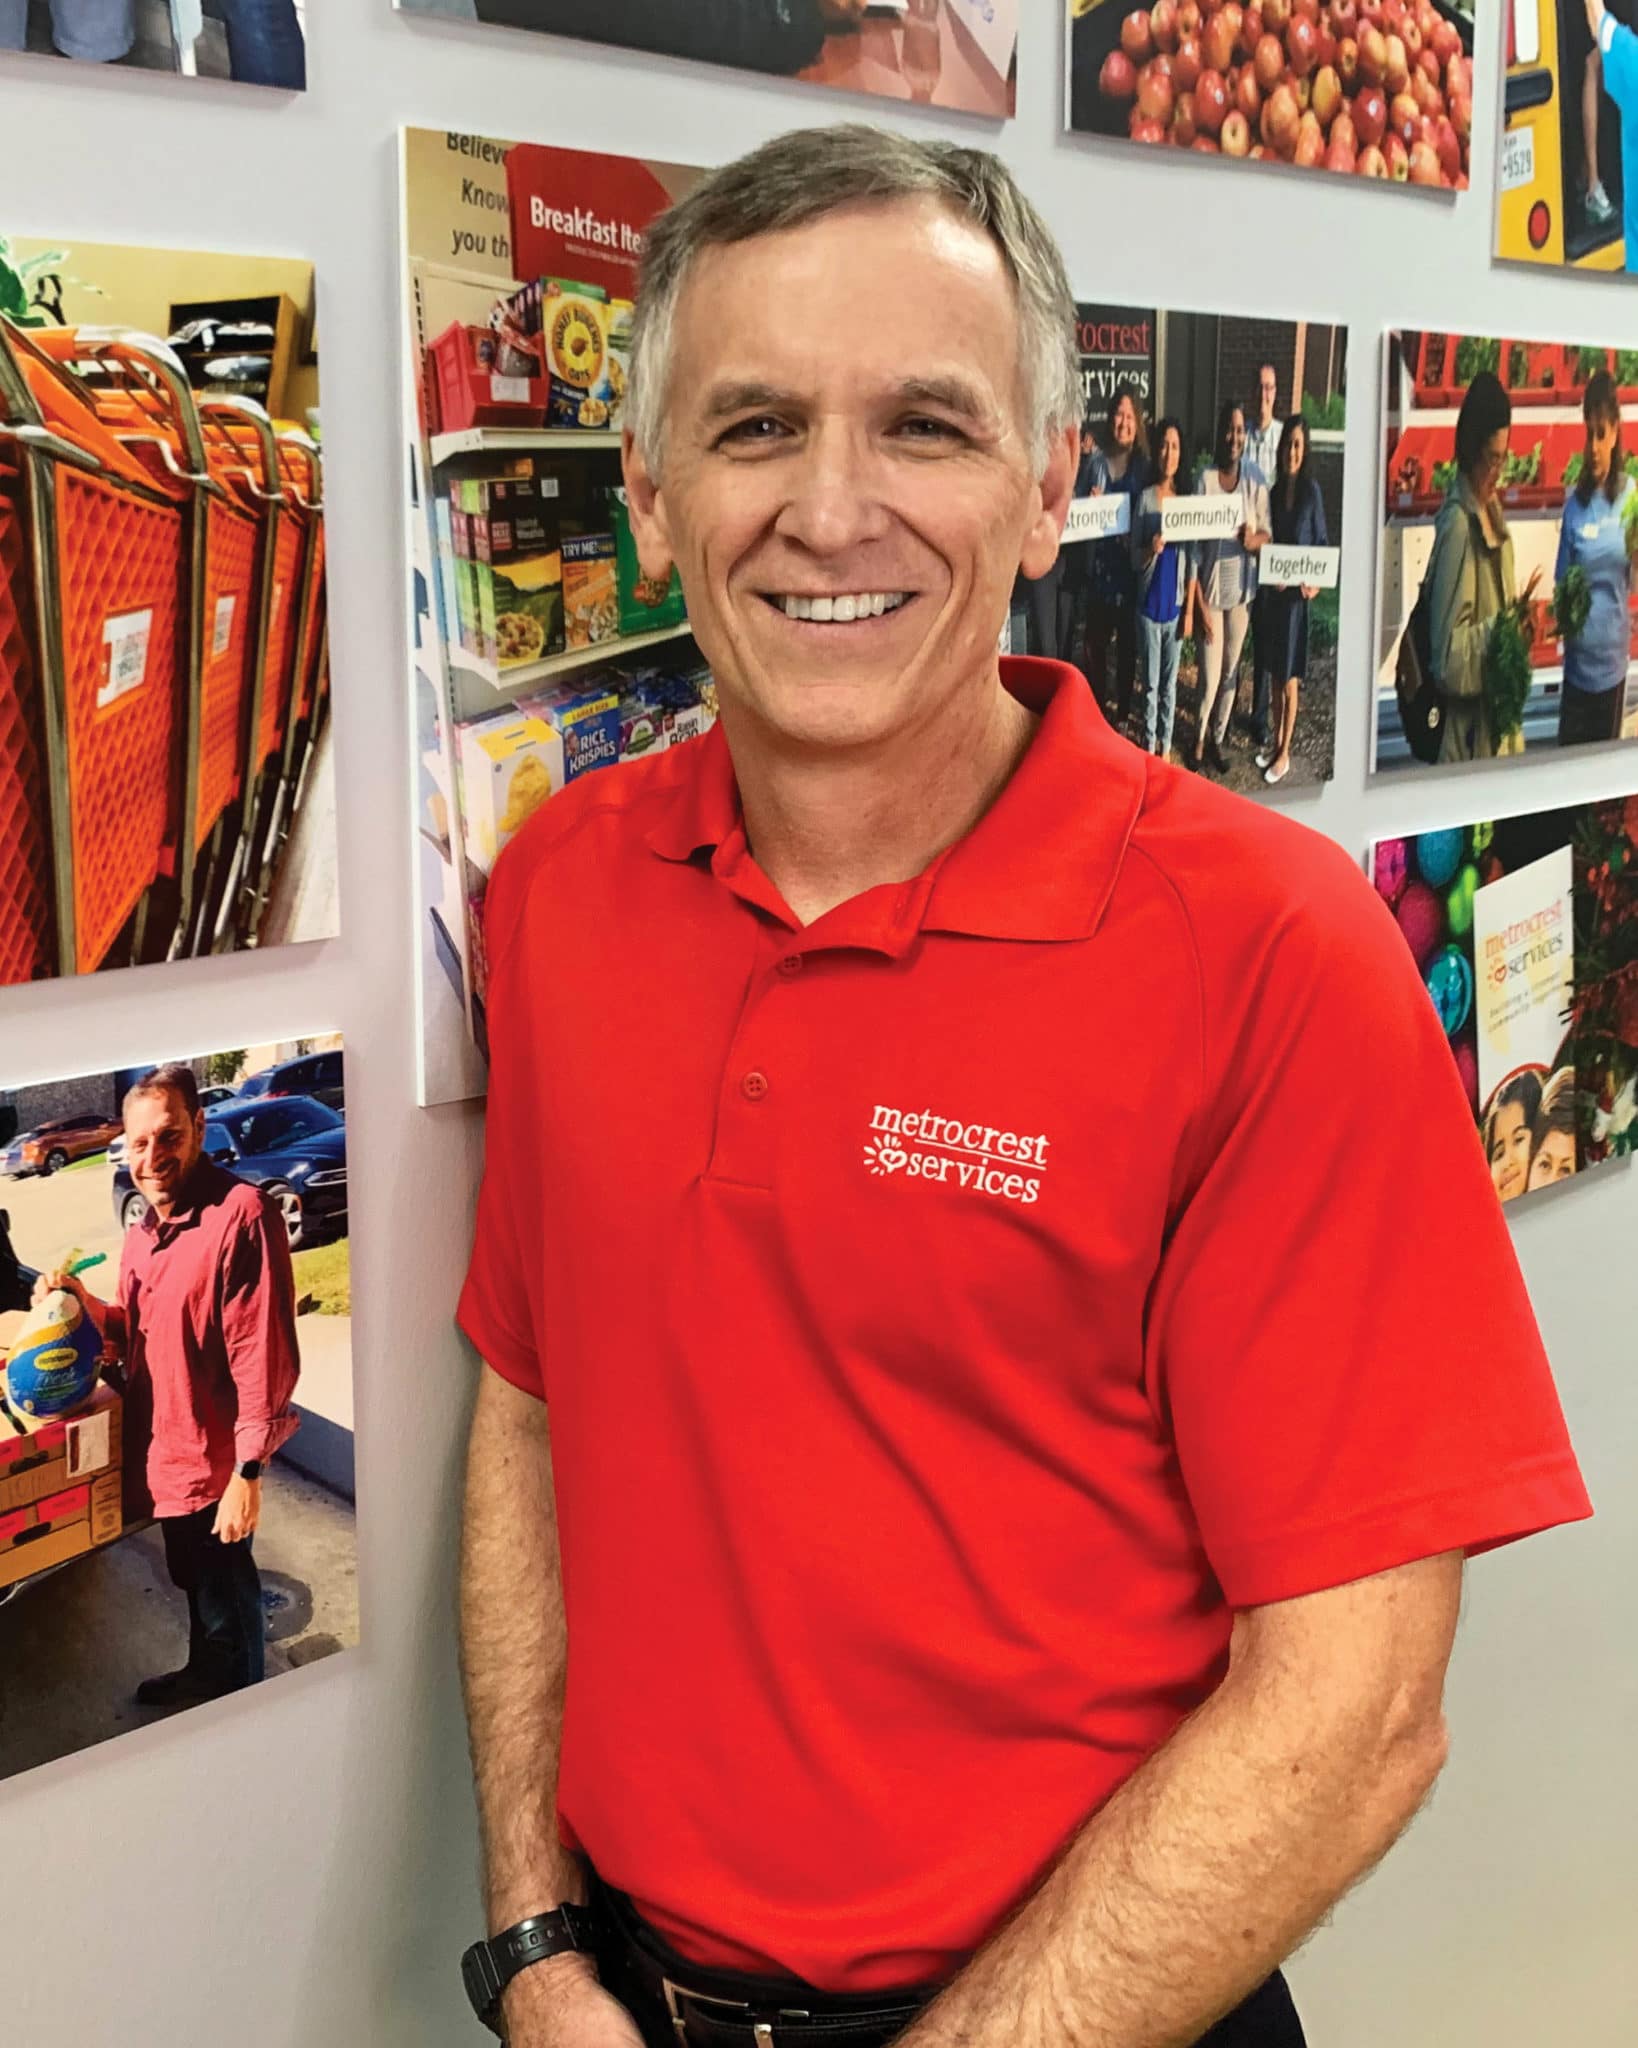 White man in a red polo shirt leaning against a wall with hanging pictures